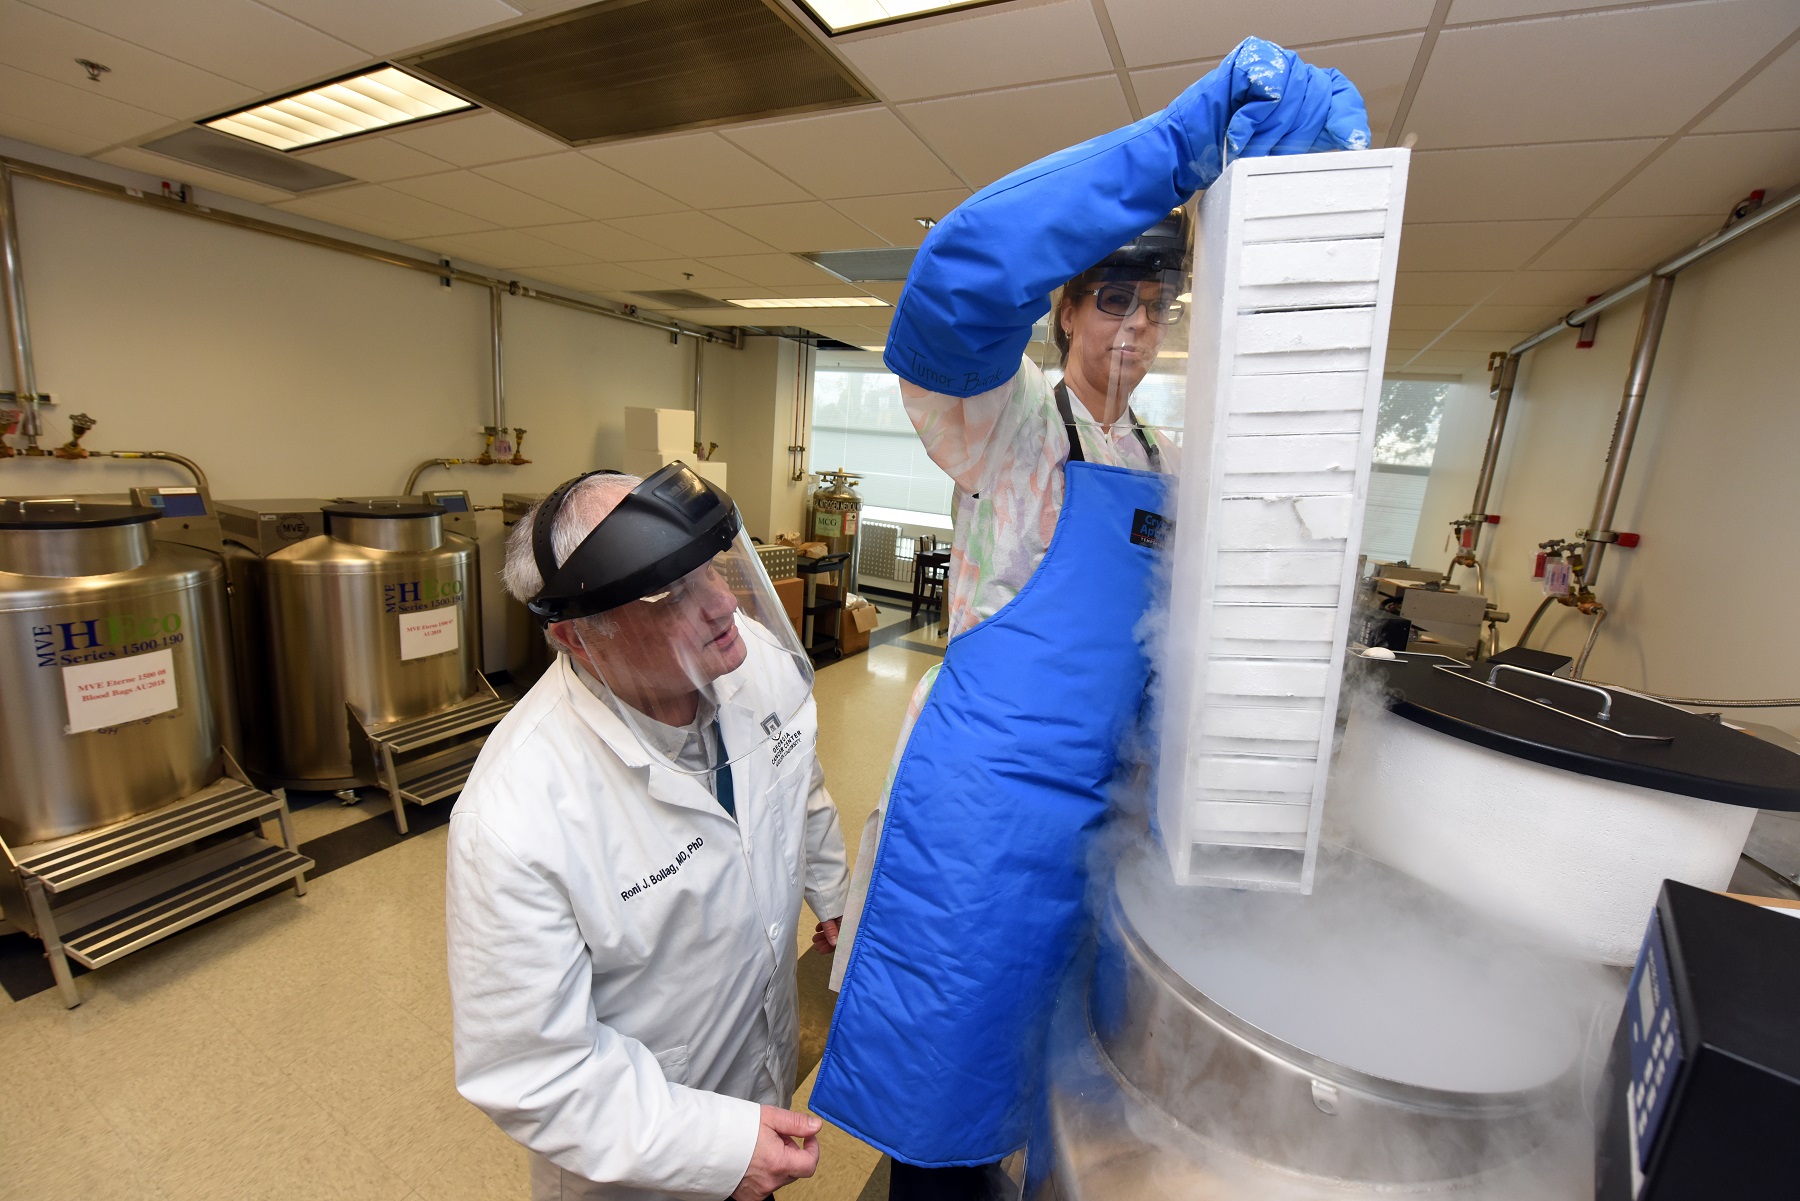 Pulling cancer tissue samples from cold storage